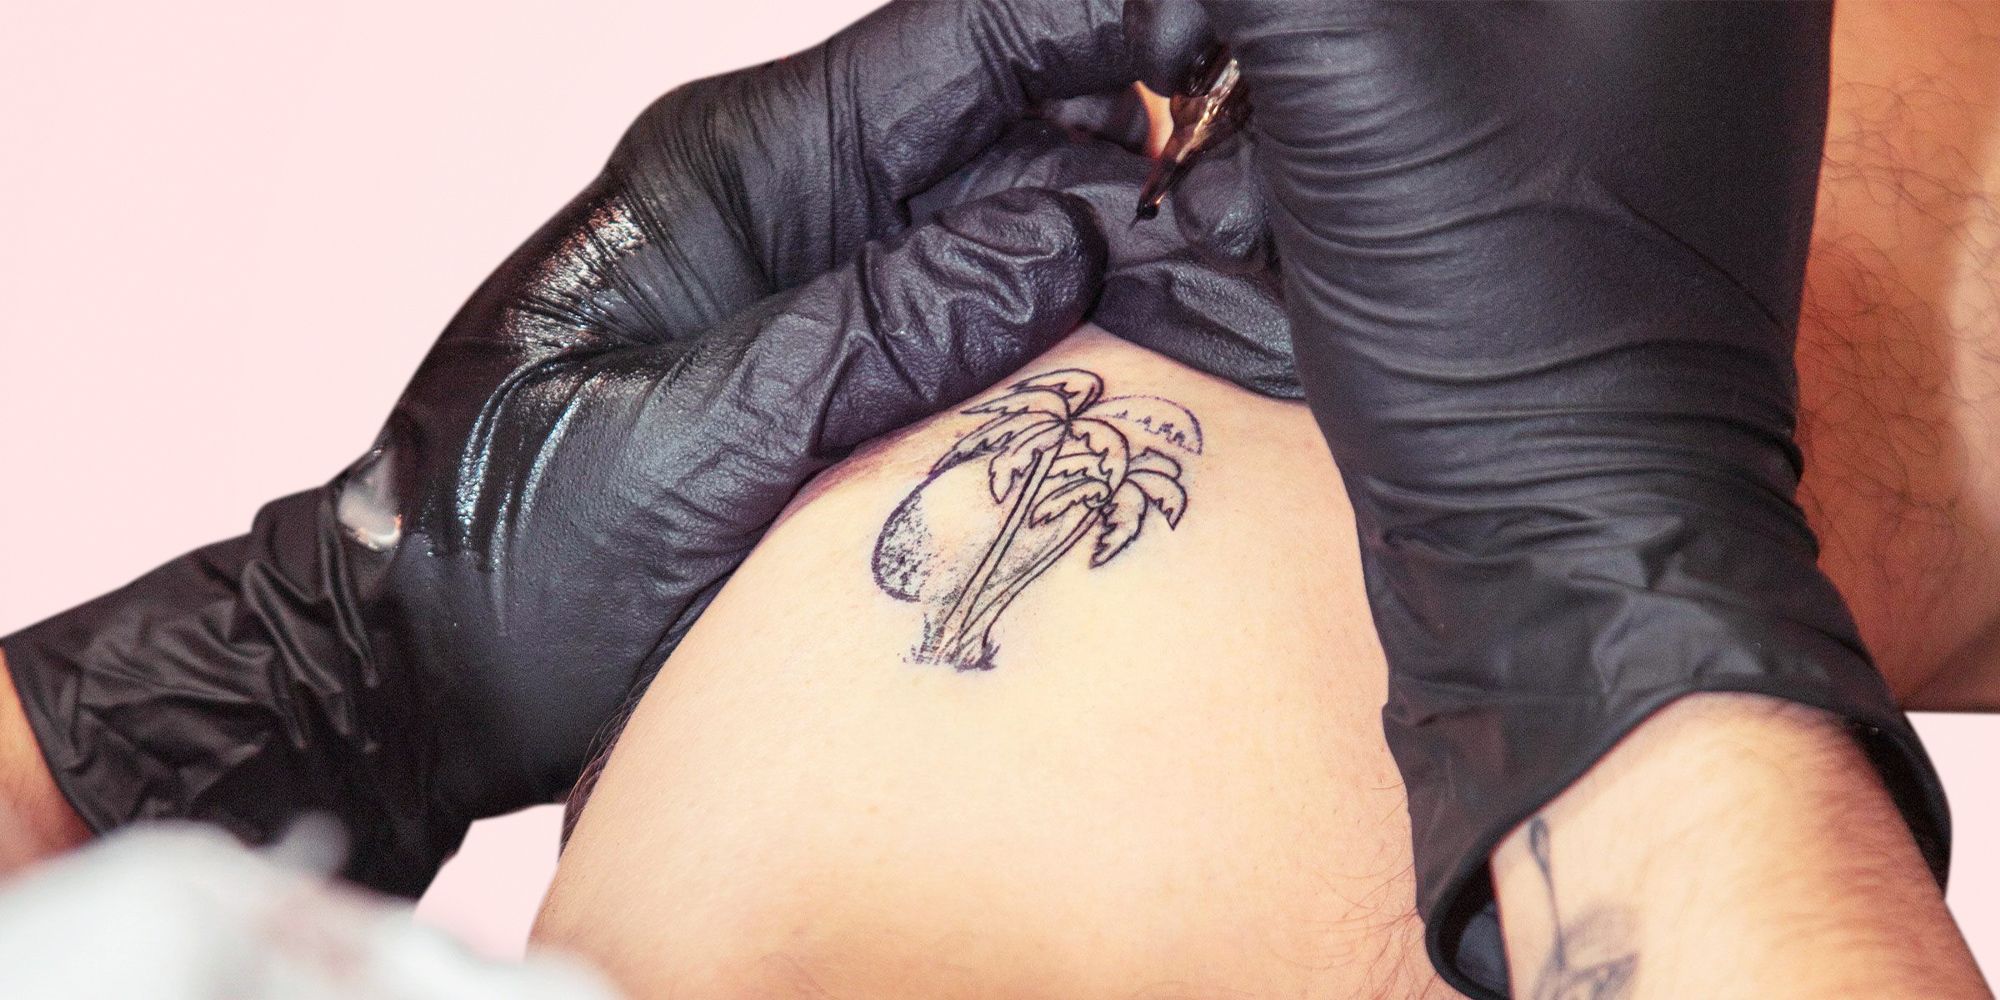 Are Made-to-Fade Tattoos the Future of Body Art?